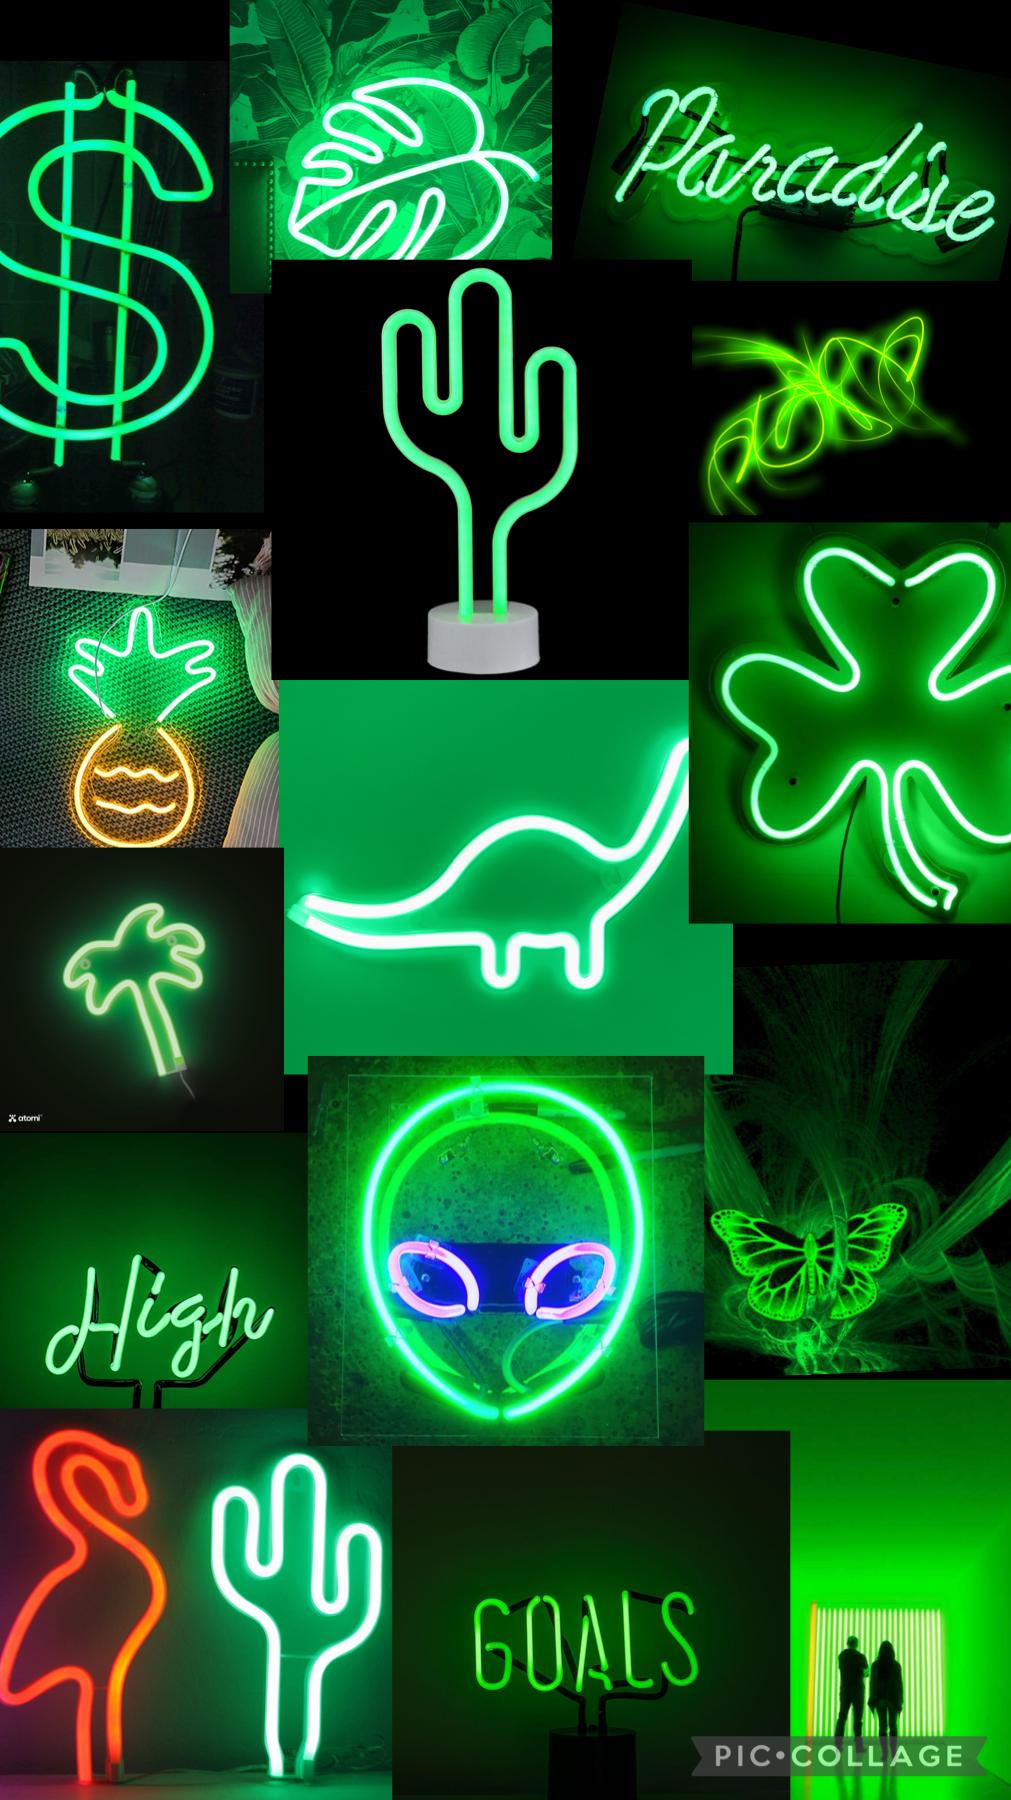 🖤Green neon lights🖤
   🖤I’m so sorry guys I went on vacation last week!🖤
      🖤so this post is very late🖤
         🖤I’m so tired of life lately🖤
            🖤I’ve had enough🖤
               🖤love you guys🖤